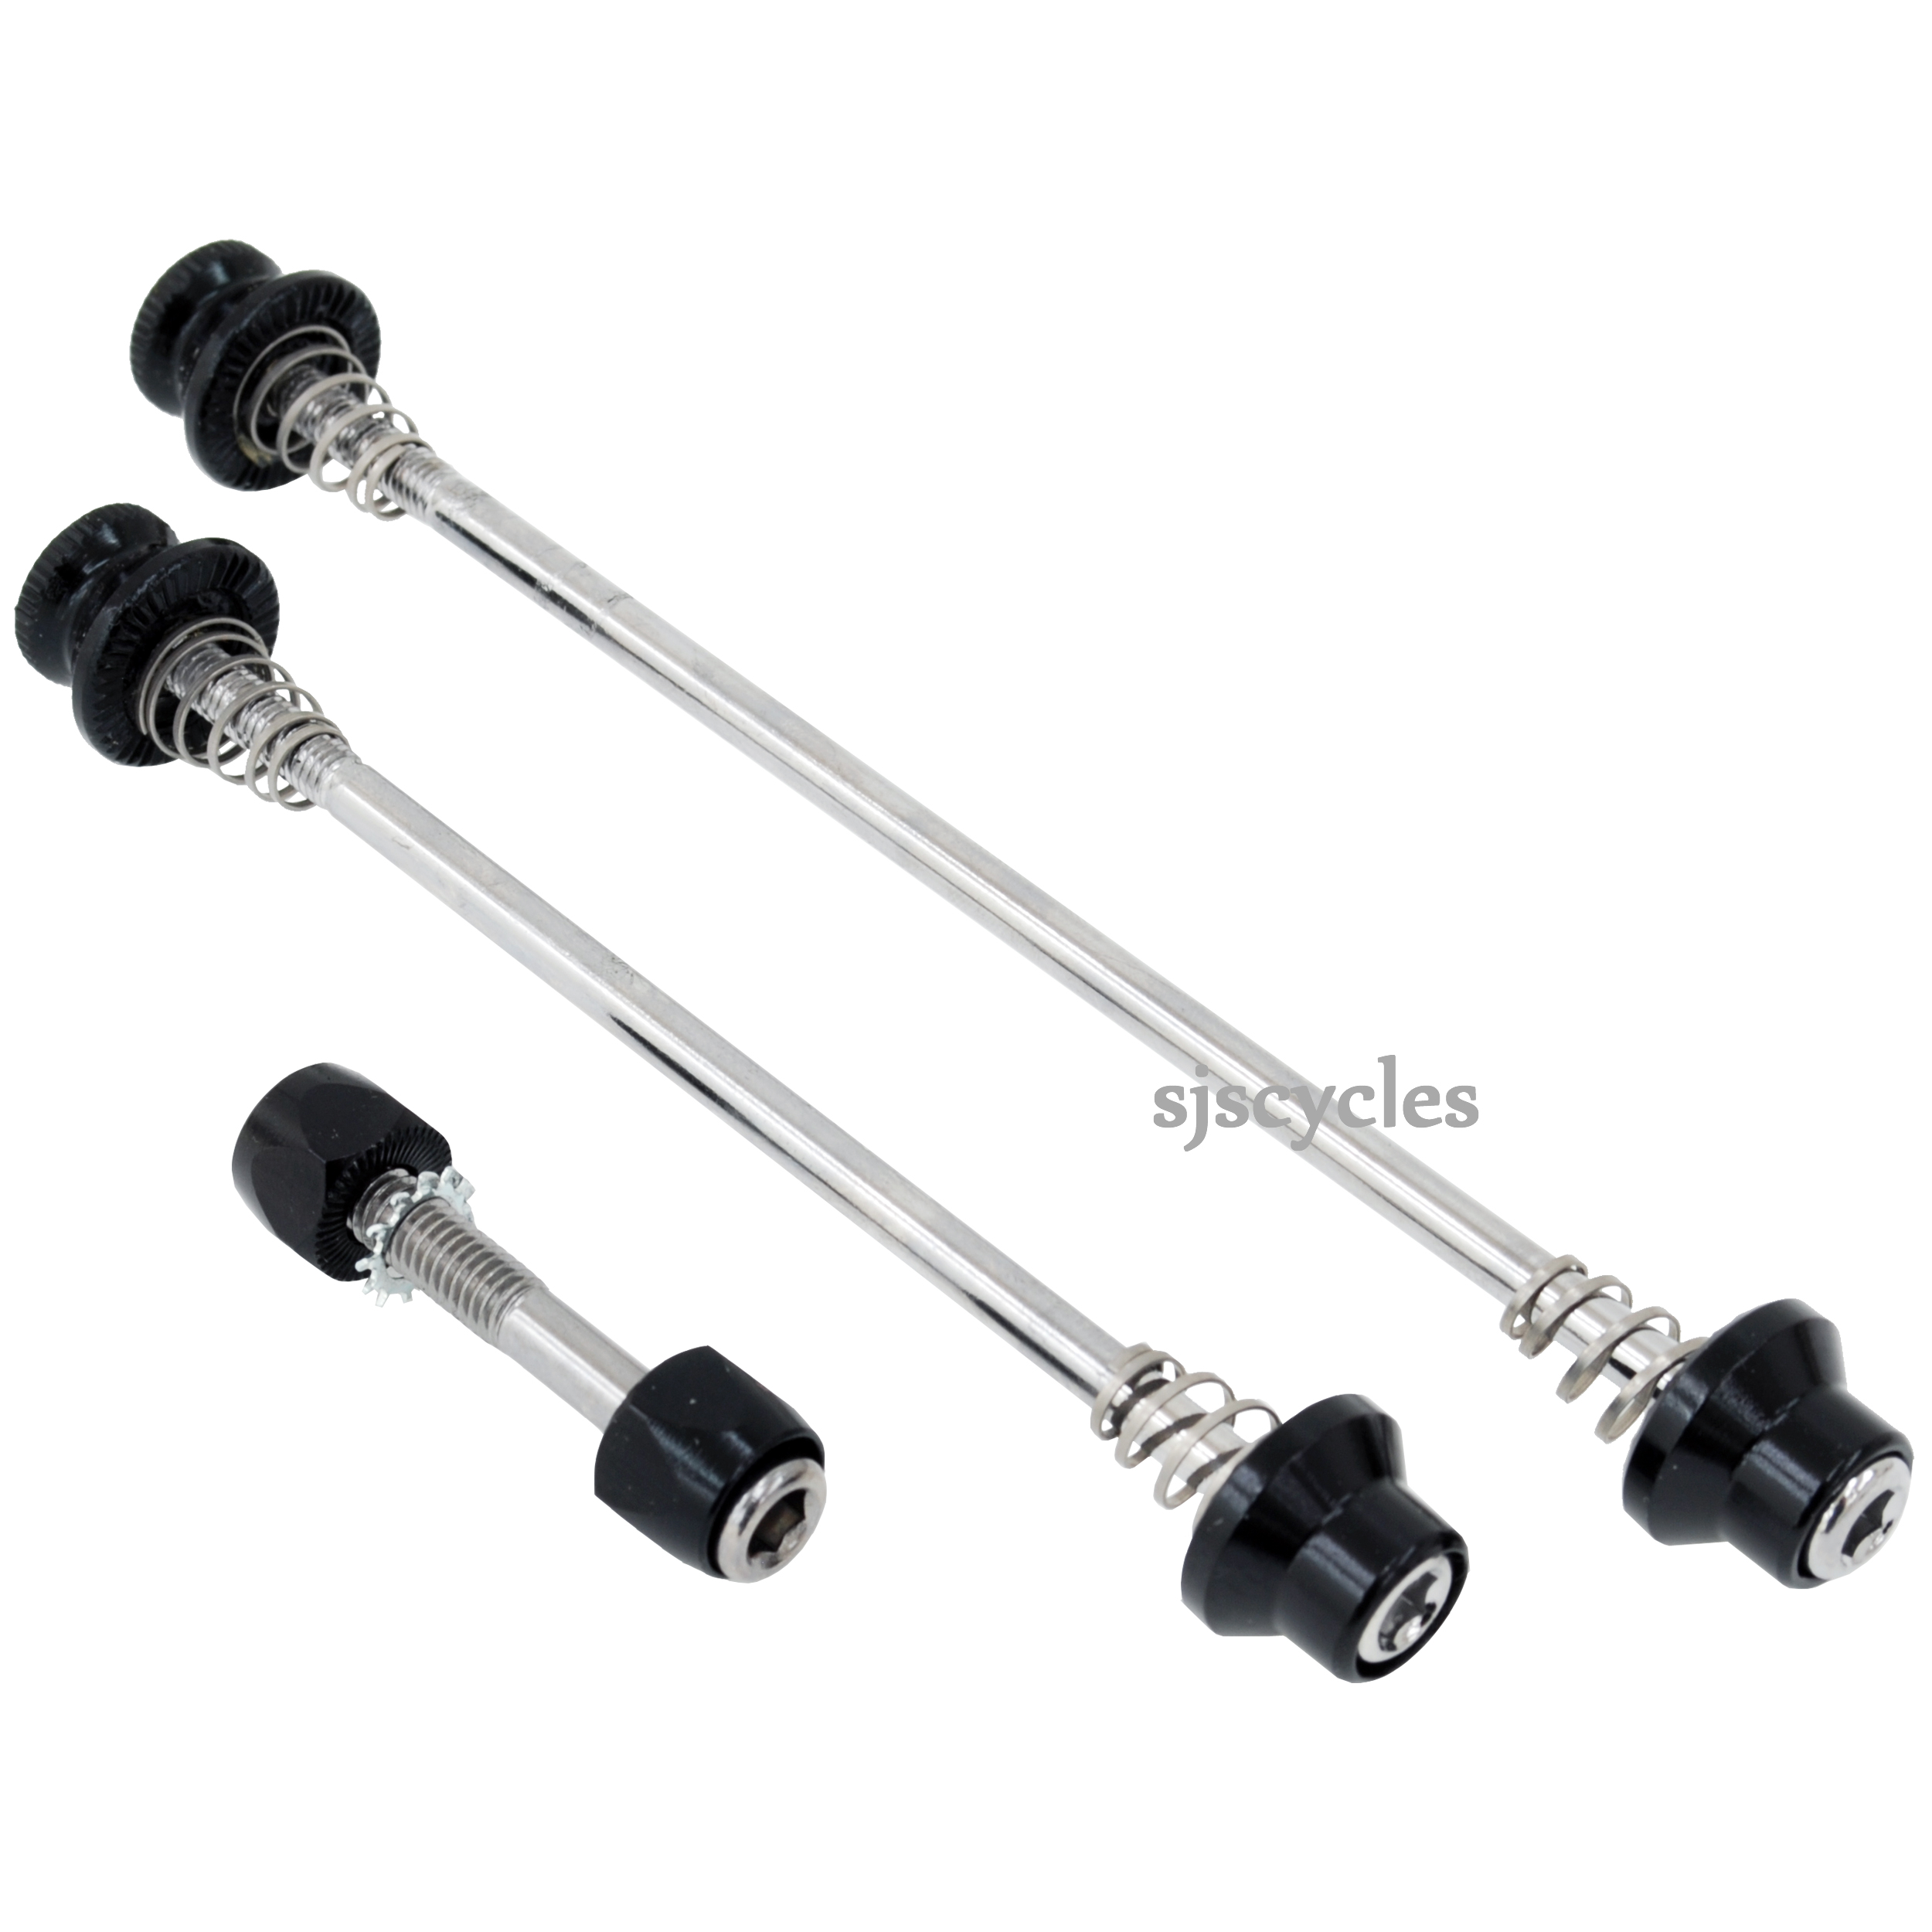 replace quick release skewer with bolts